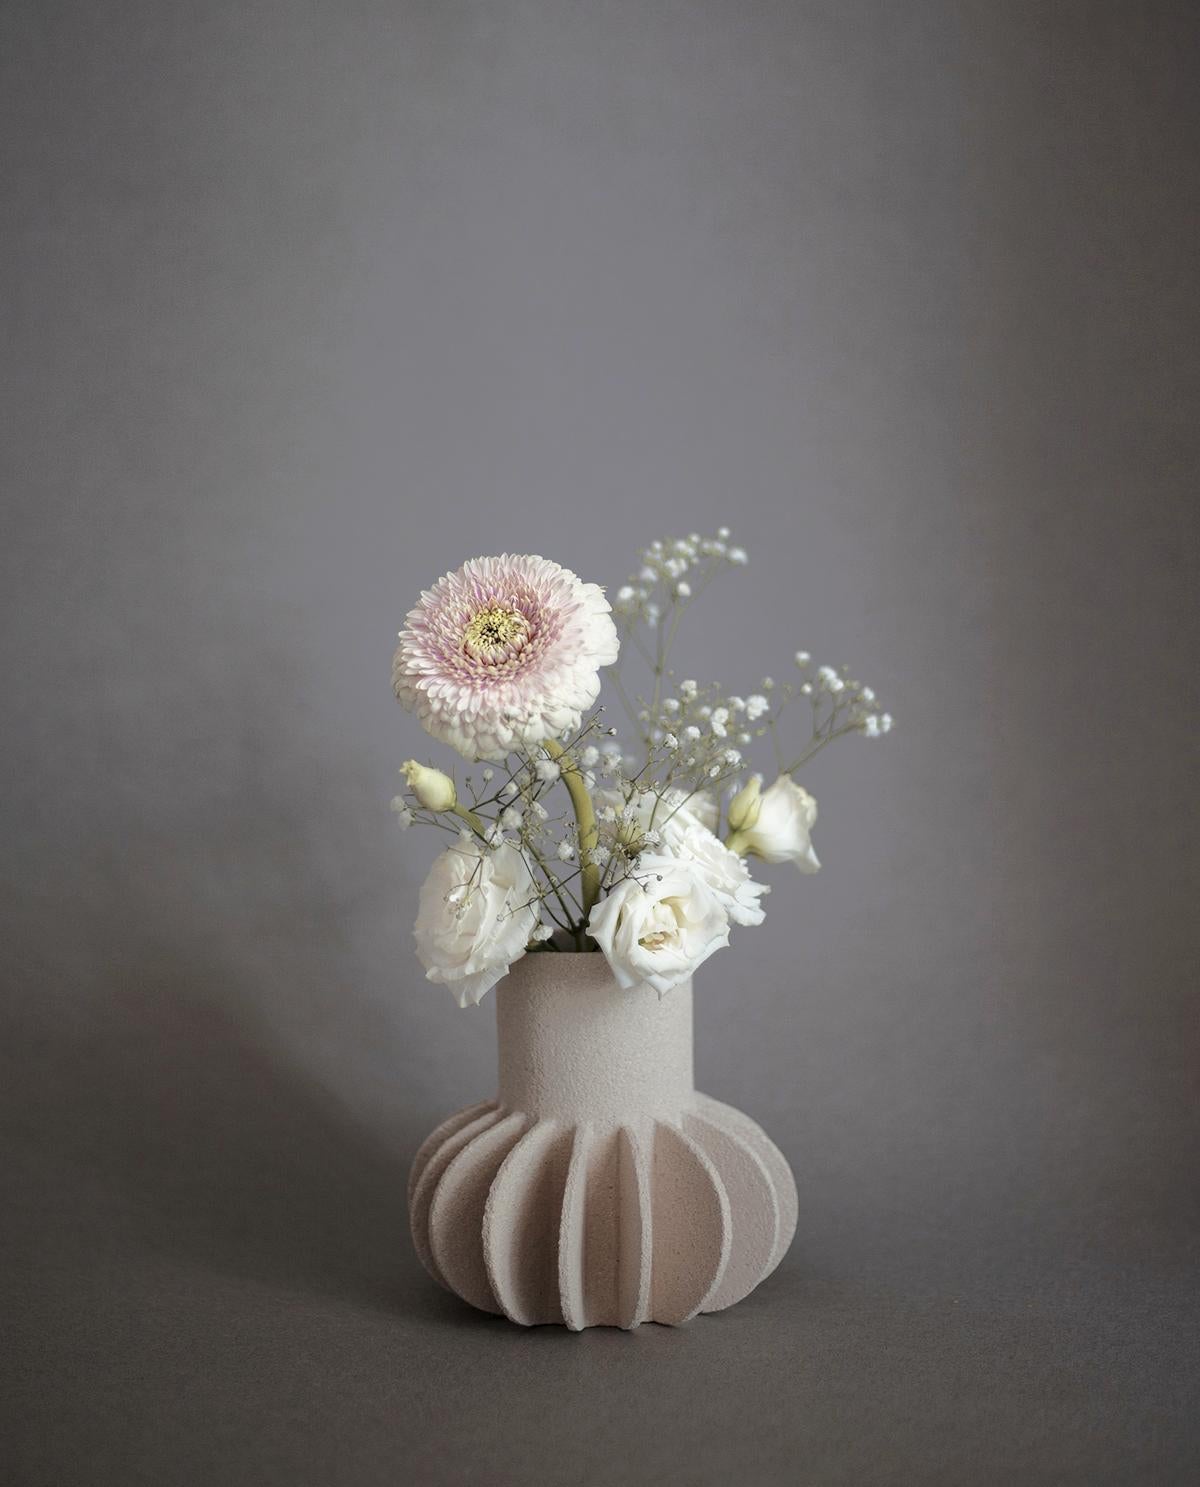 European 21st Century Mille-Pattes N°2 Vase in White Ceramic, Hand-Crafted in France